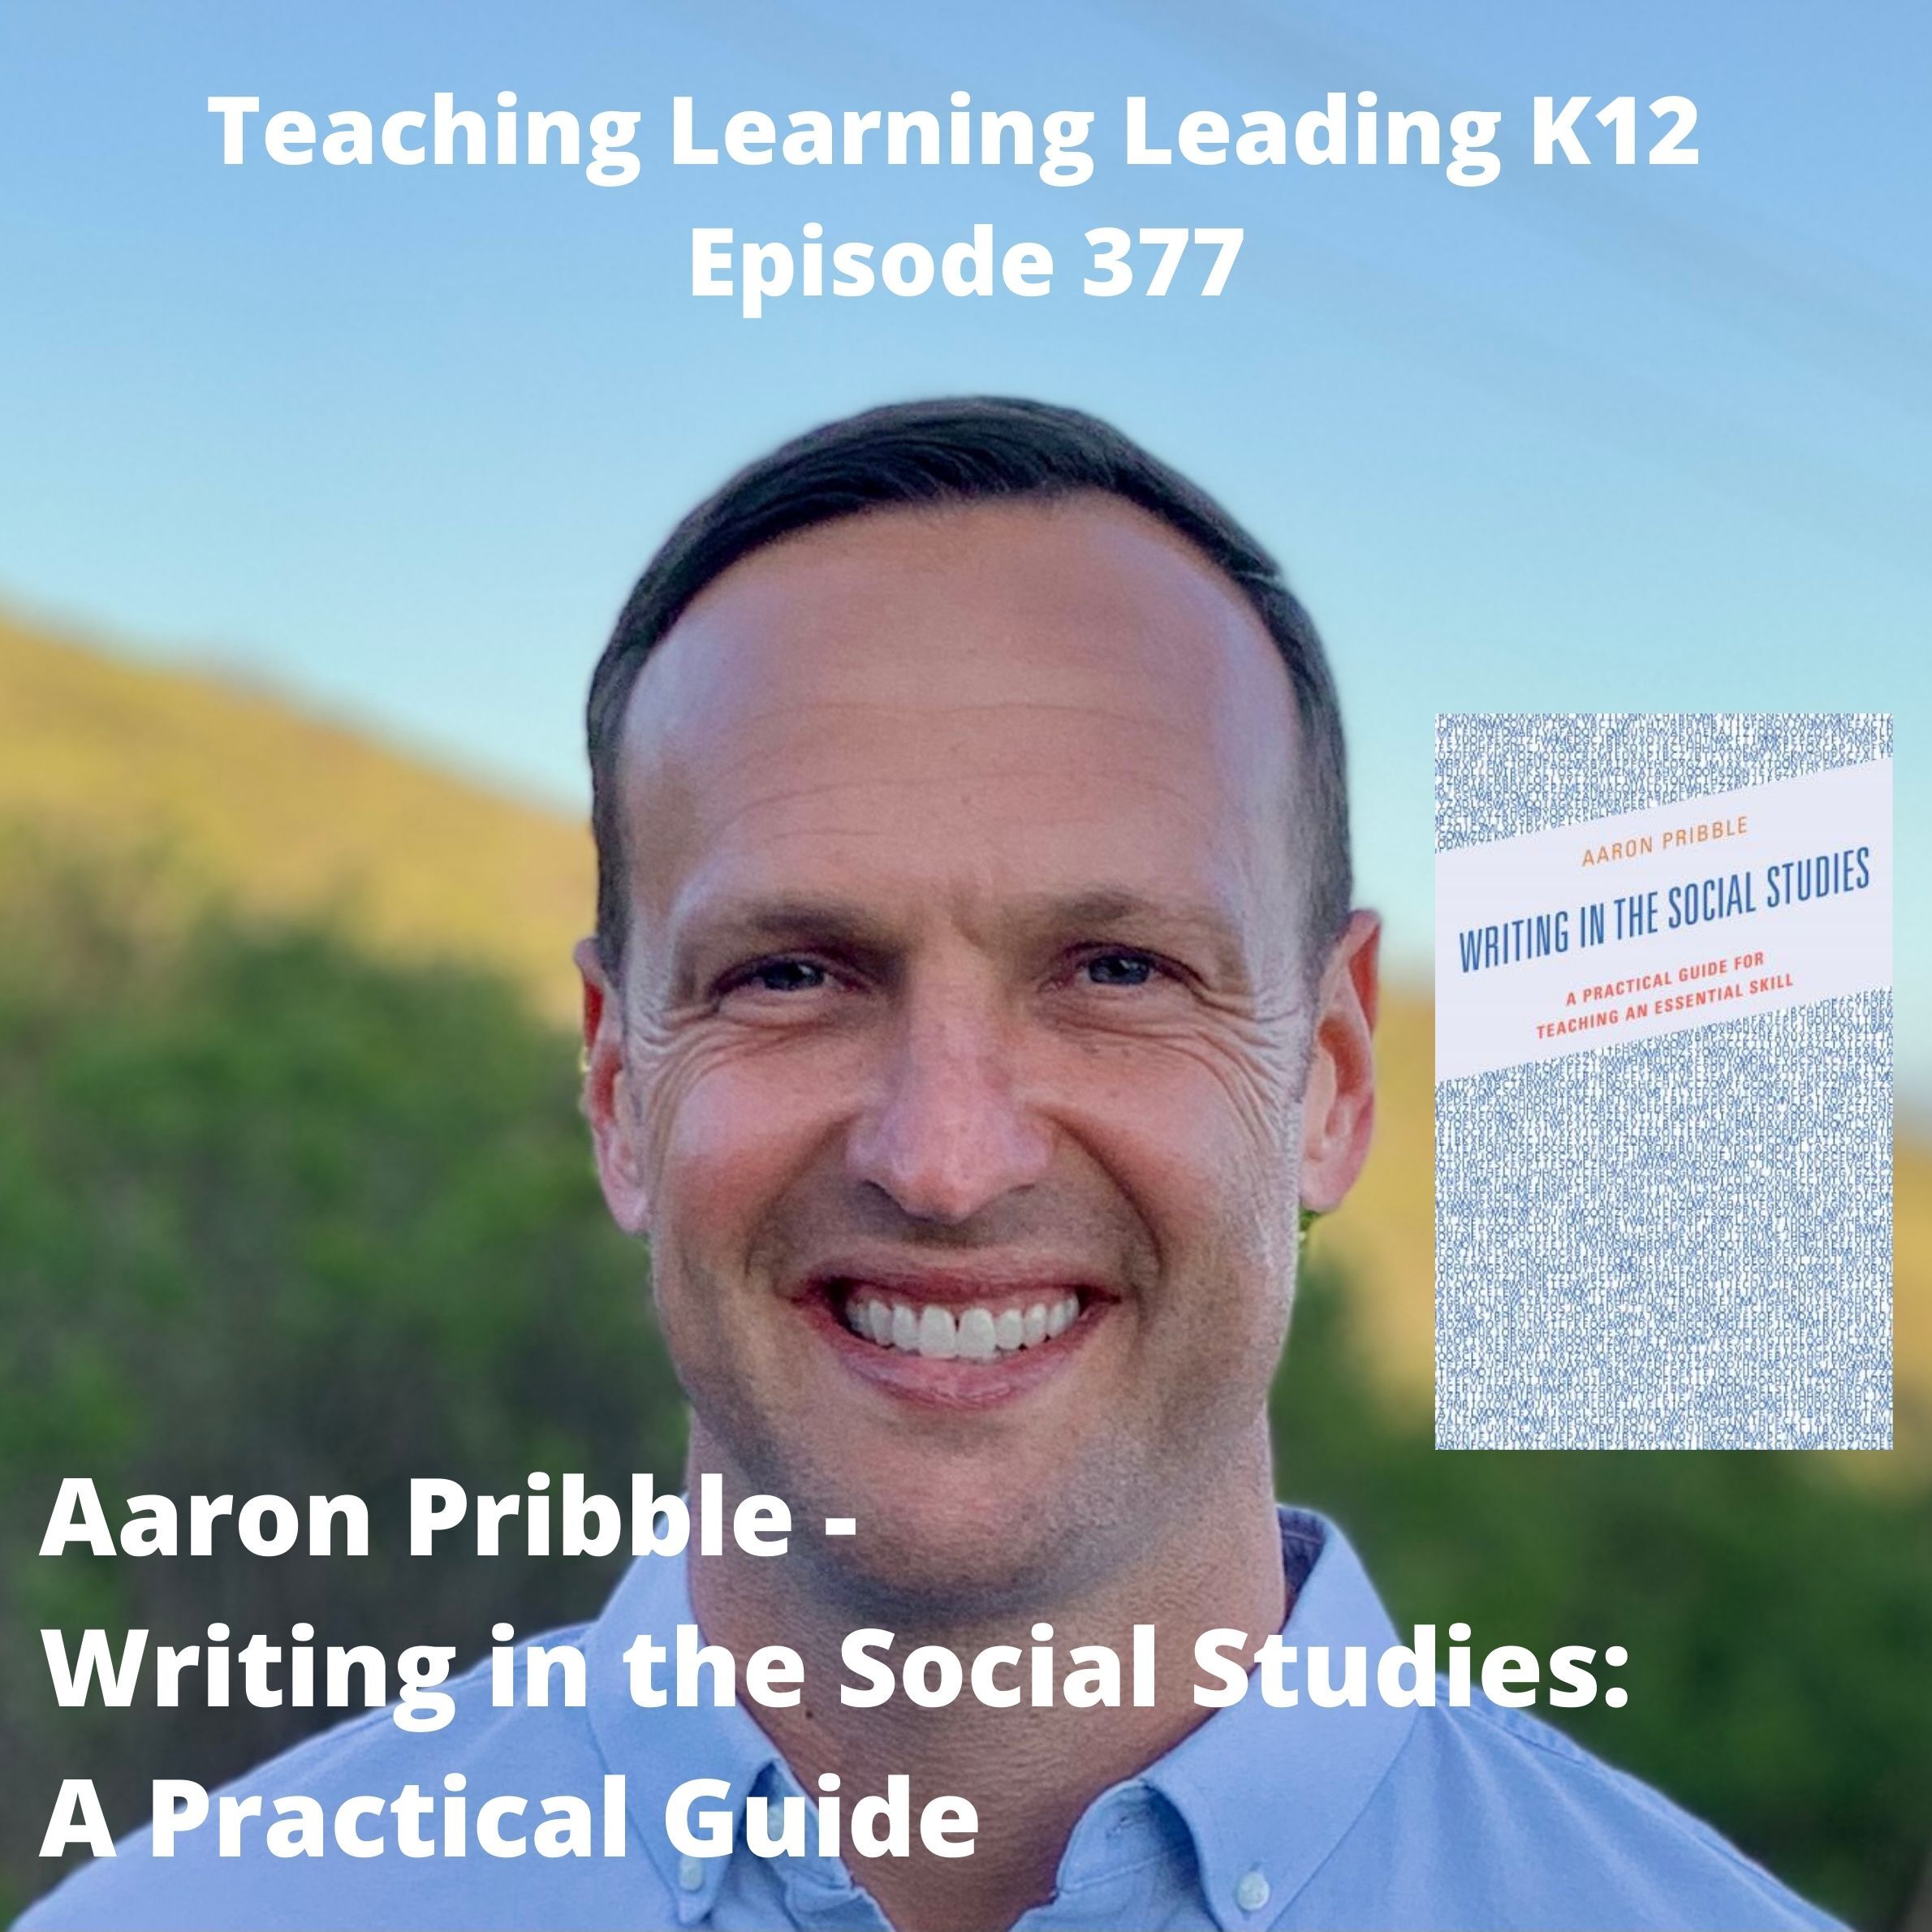 Aaron Pribble - Writing in the Social Studies: A Practical Guide - 377